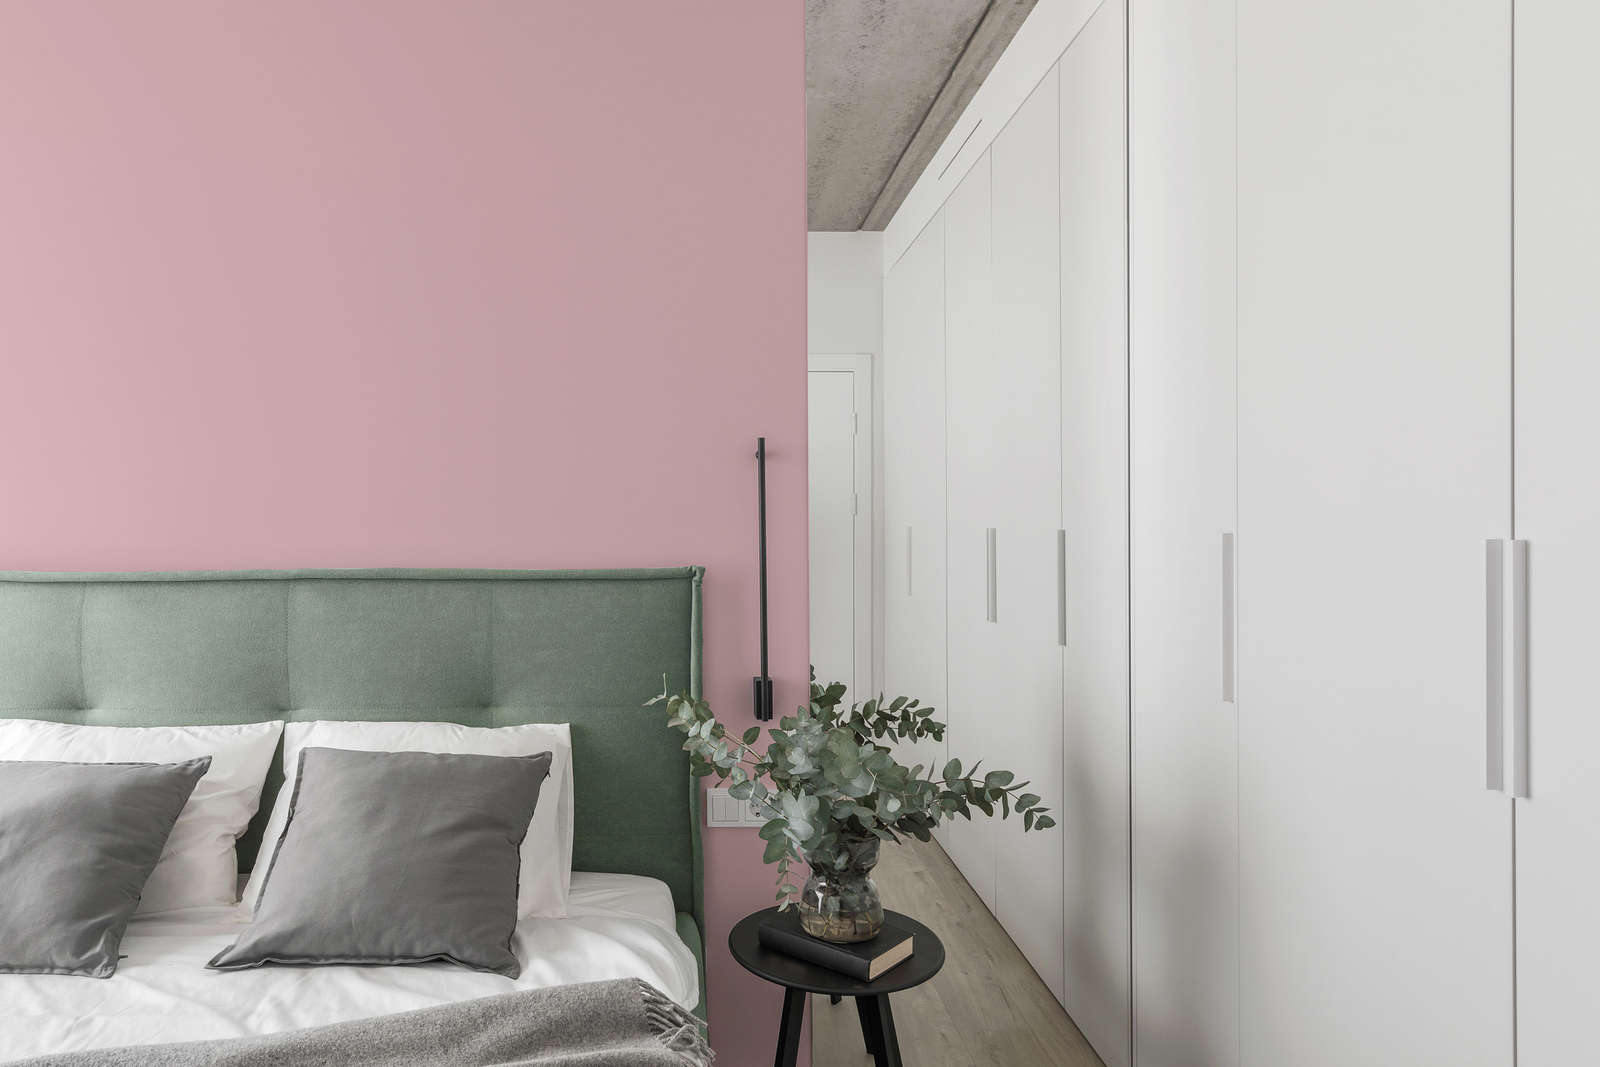             Premium Wall Paint lovely pink »Blooming Blossom« NW1016 – 2,5 litre
        